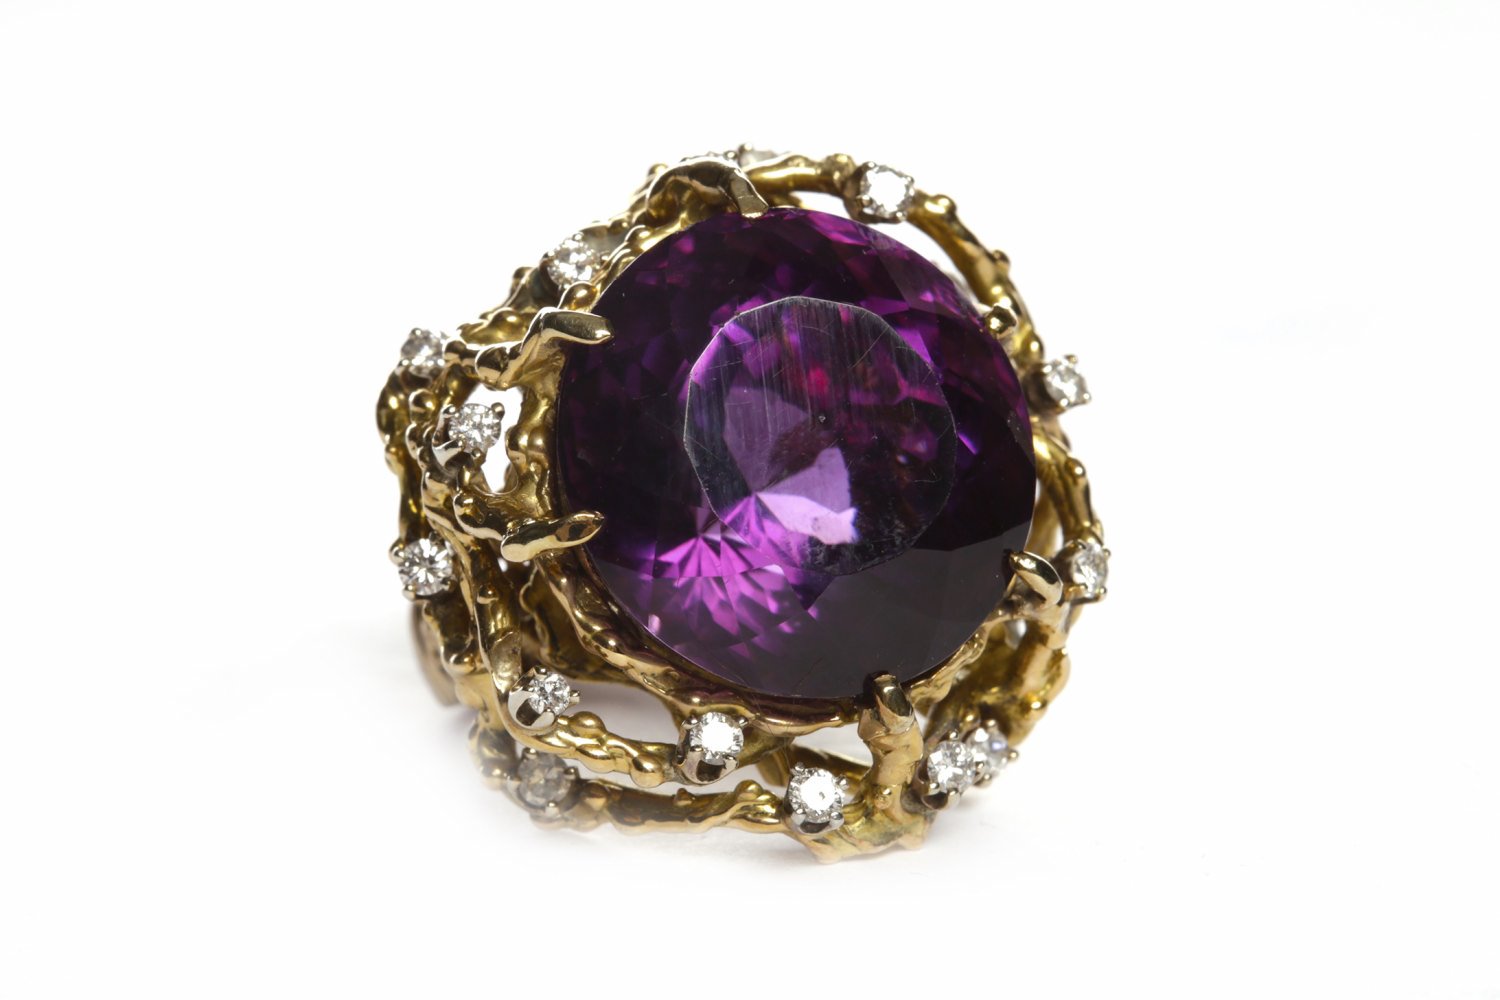 IMPRESSIVE 1970S AMETHYST AND DIAMOND DRESS RING set with a large round faceted amethyst